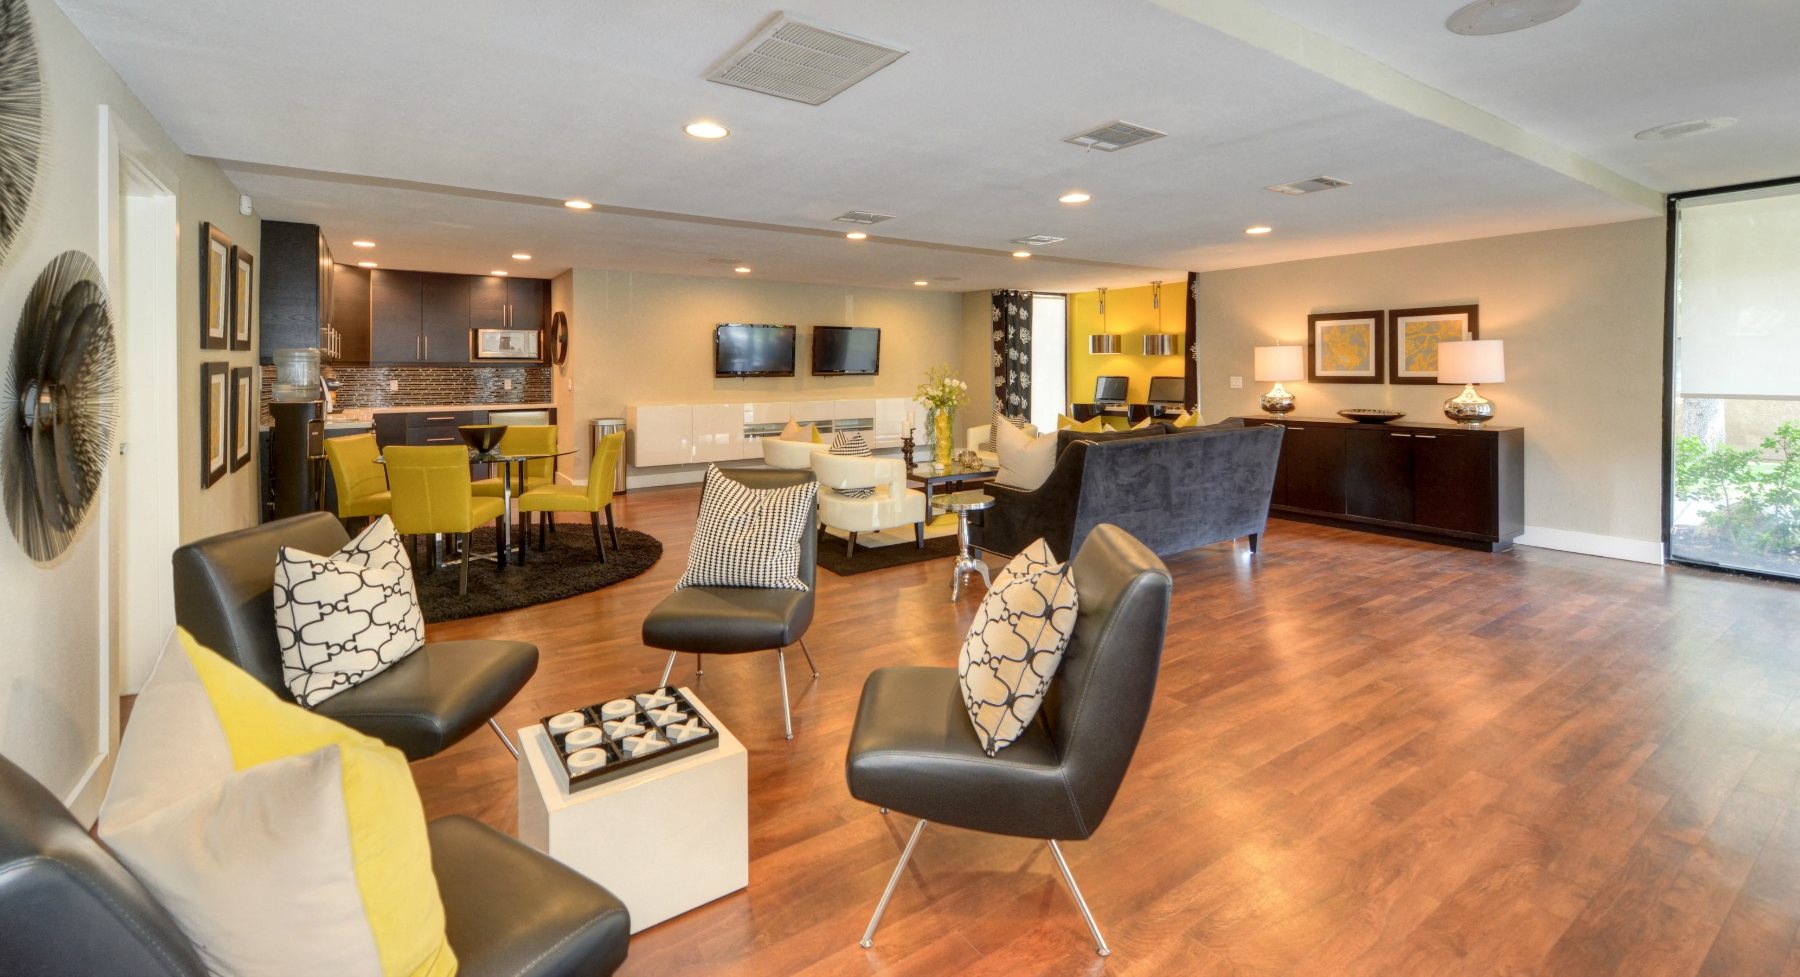 Clubhouse Lounge Area with Hardwood Inspired Floors, Black Sofa Chairs, Windows, and View of Kitchen Area